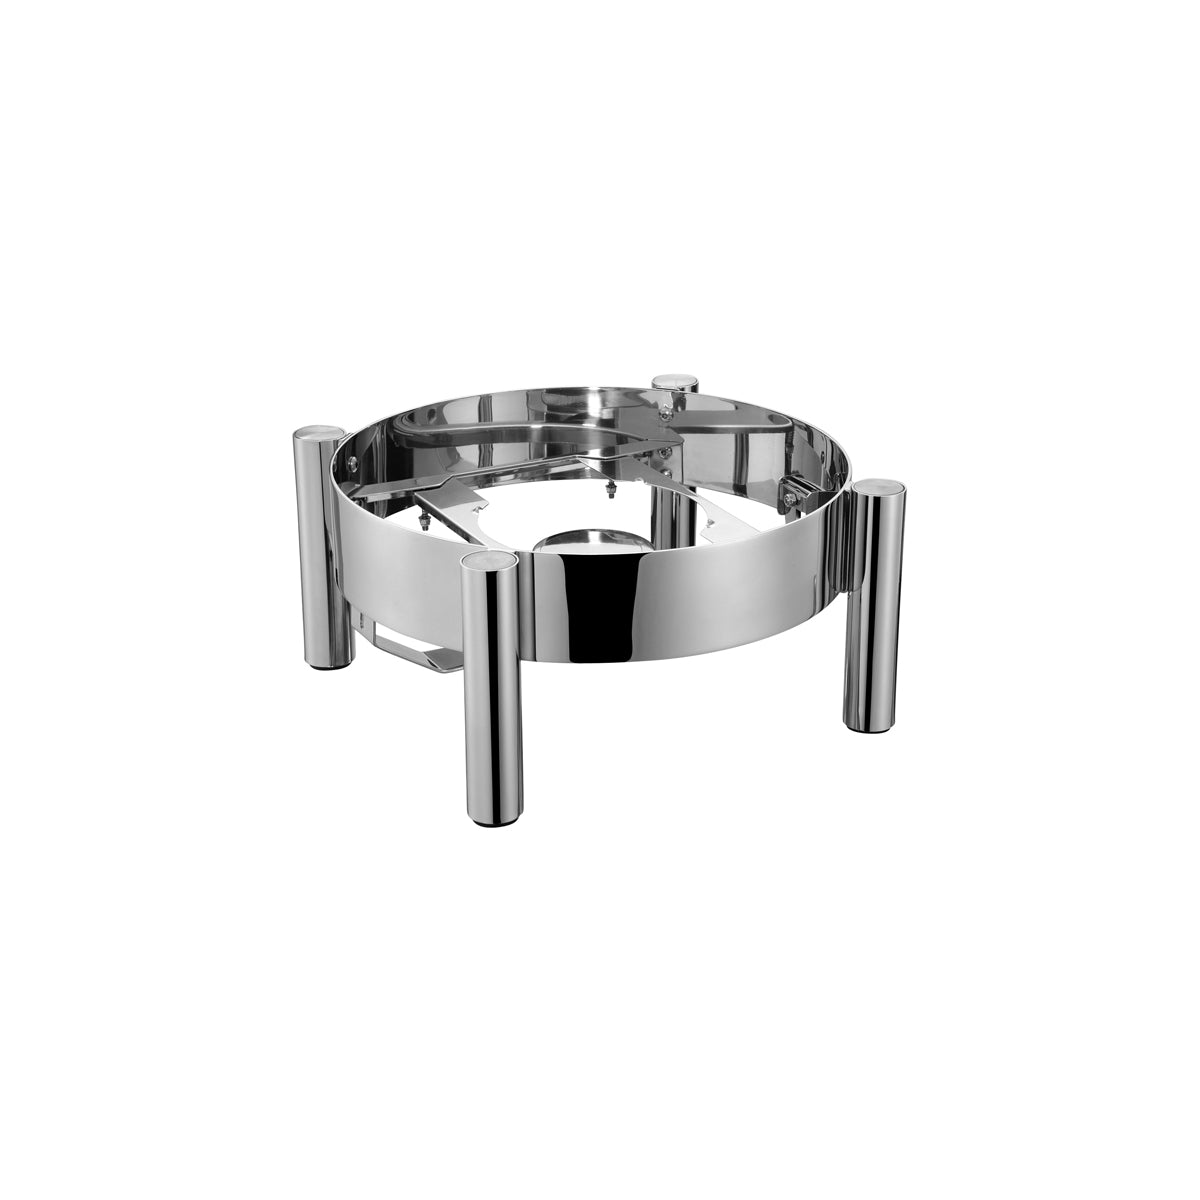 54906-S Chef Inox Chafer Round Stand Stainless Steel to Suit 54906 Tomkin Australia Hospitality Supplies